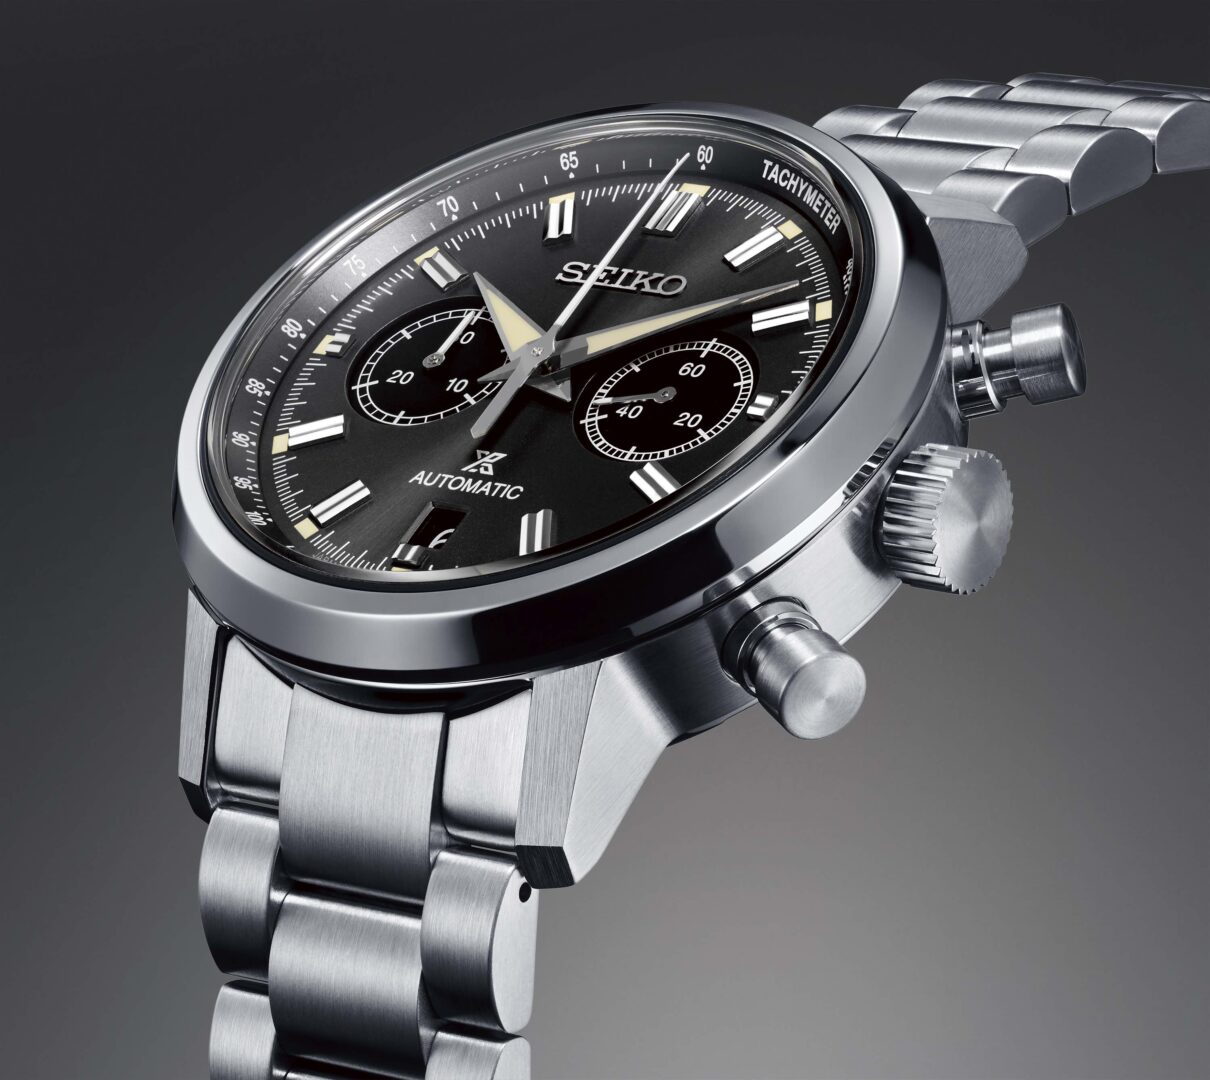 SRQ037 a The new Speedtimer is offered as a limited edition of 1,000.